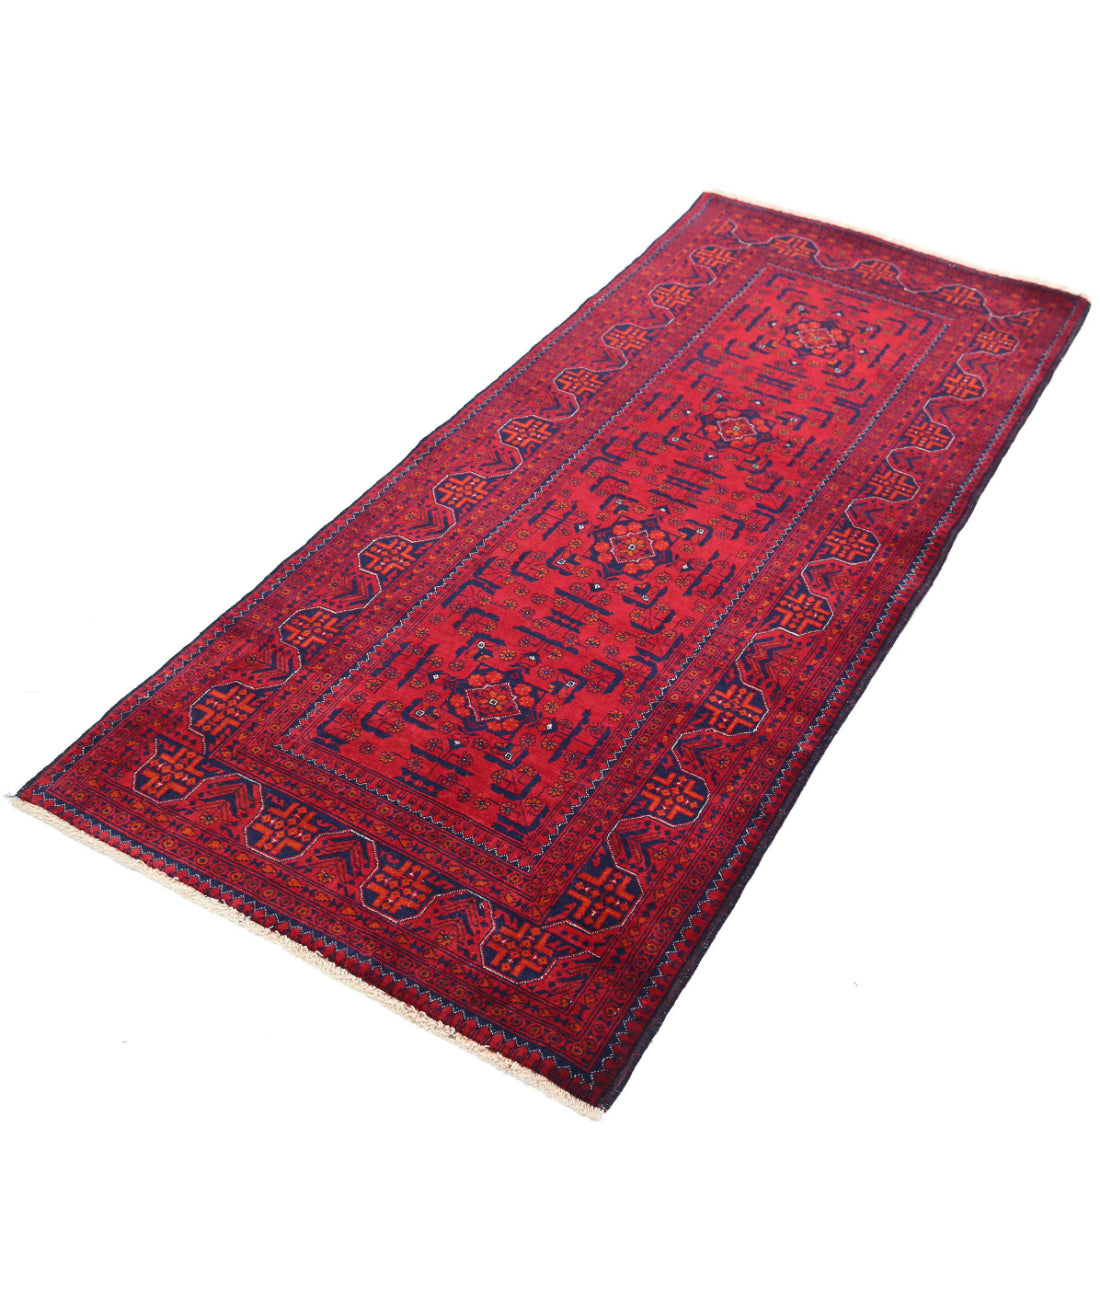 Afghan 2'8'' X 6'3'' Hand-Knotted Wool Rug 2'8'' x 6'3'' (80 X 188) / Red / Red